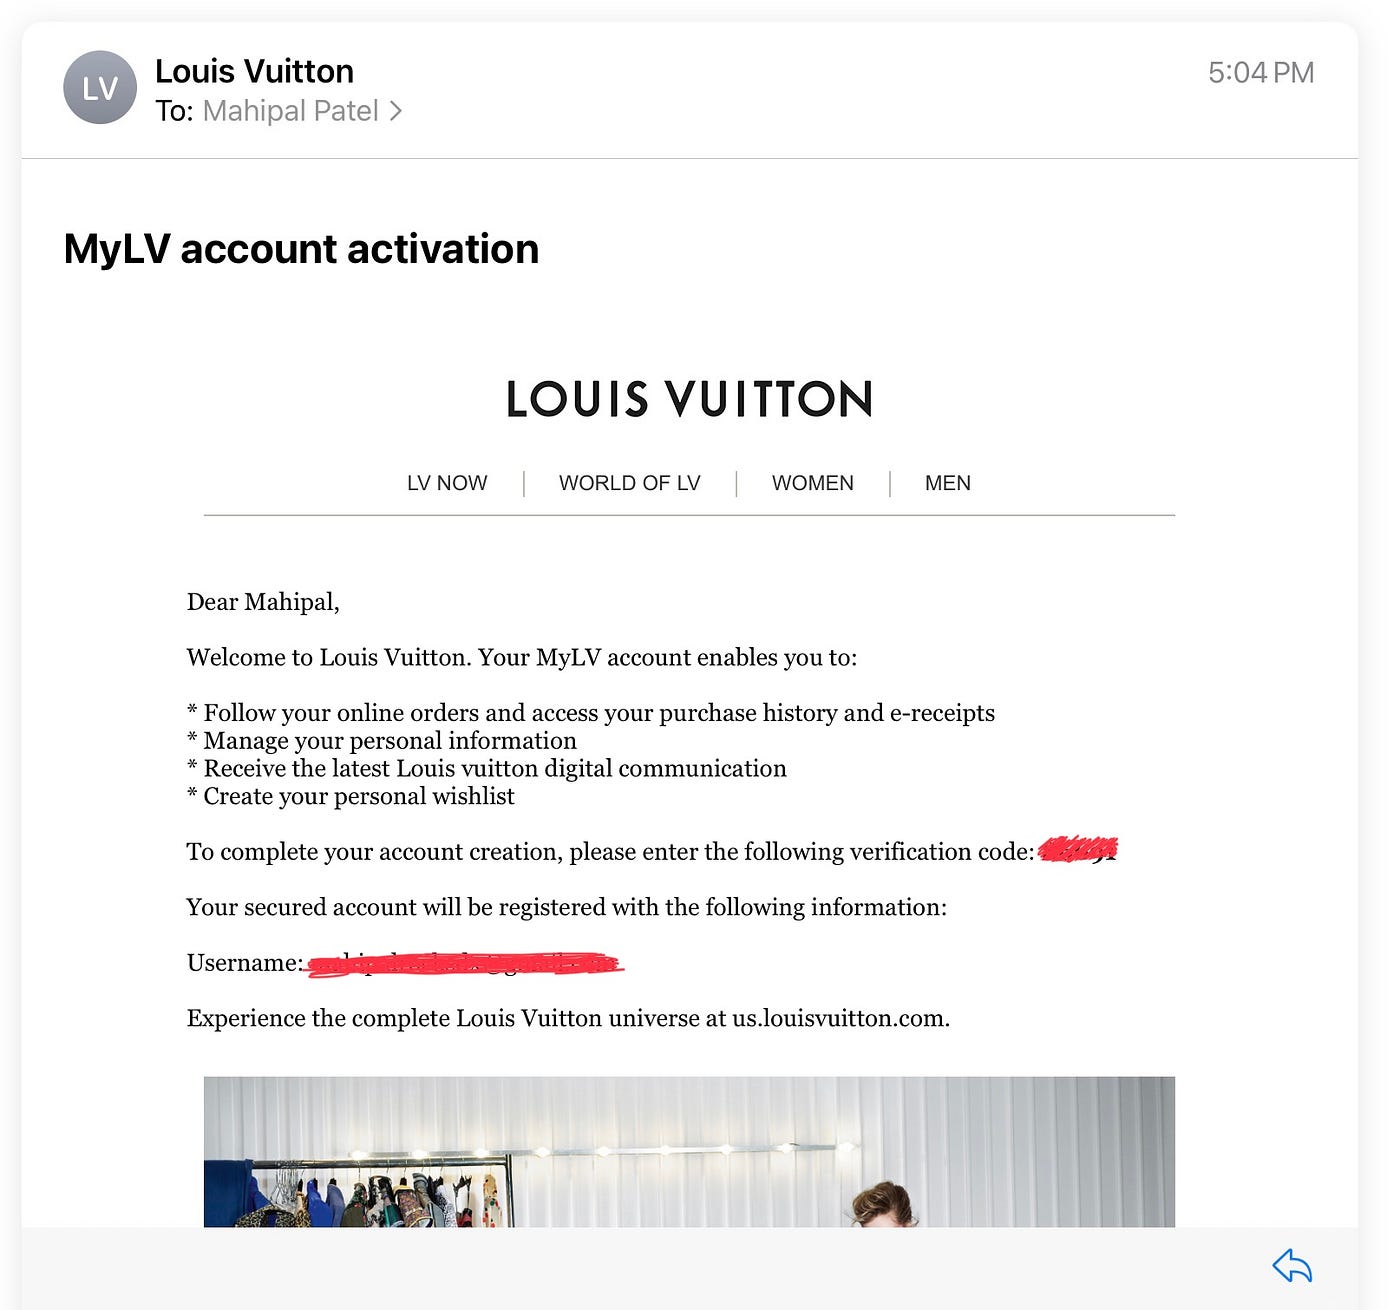 Assessing a luxury brand's email marketing game